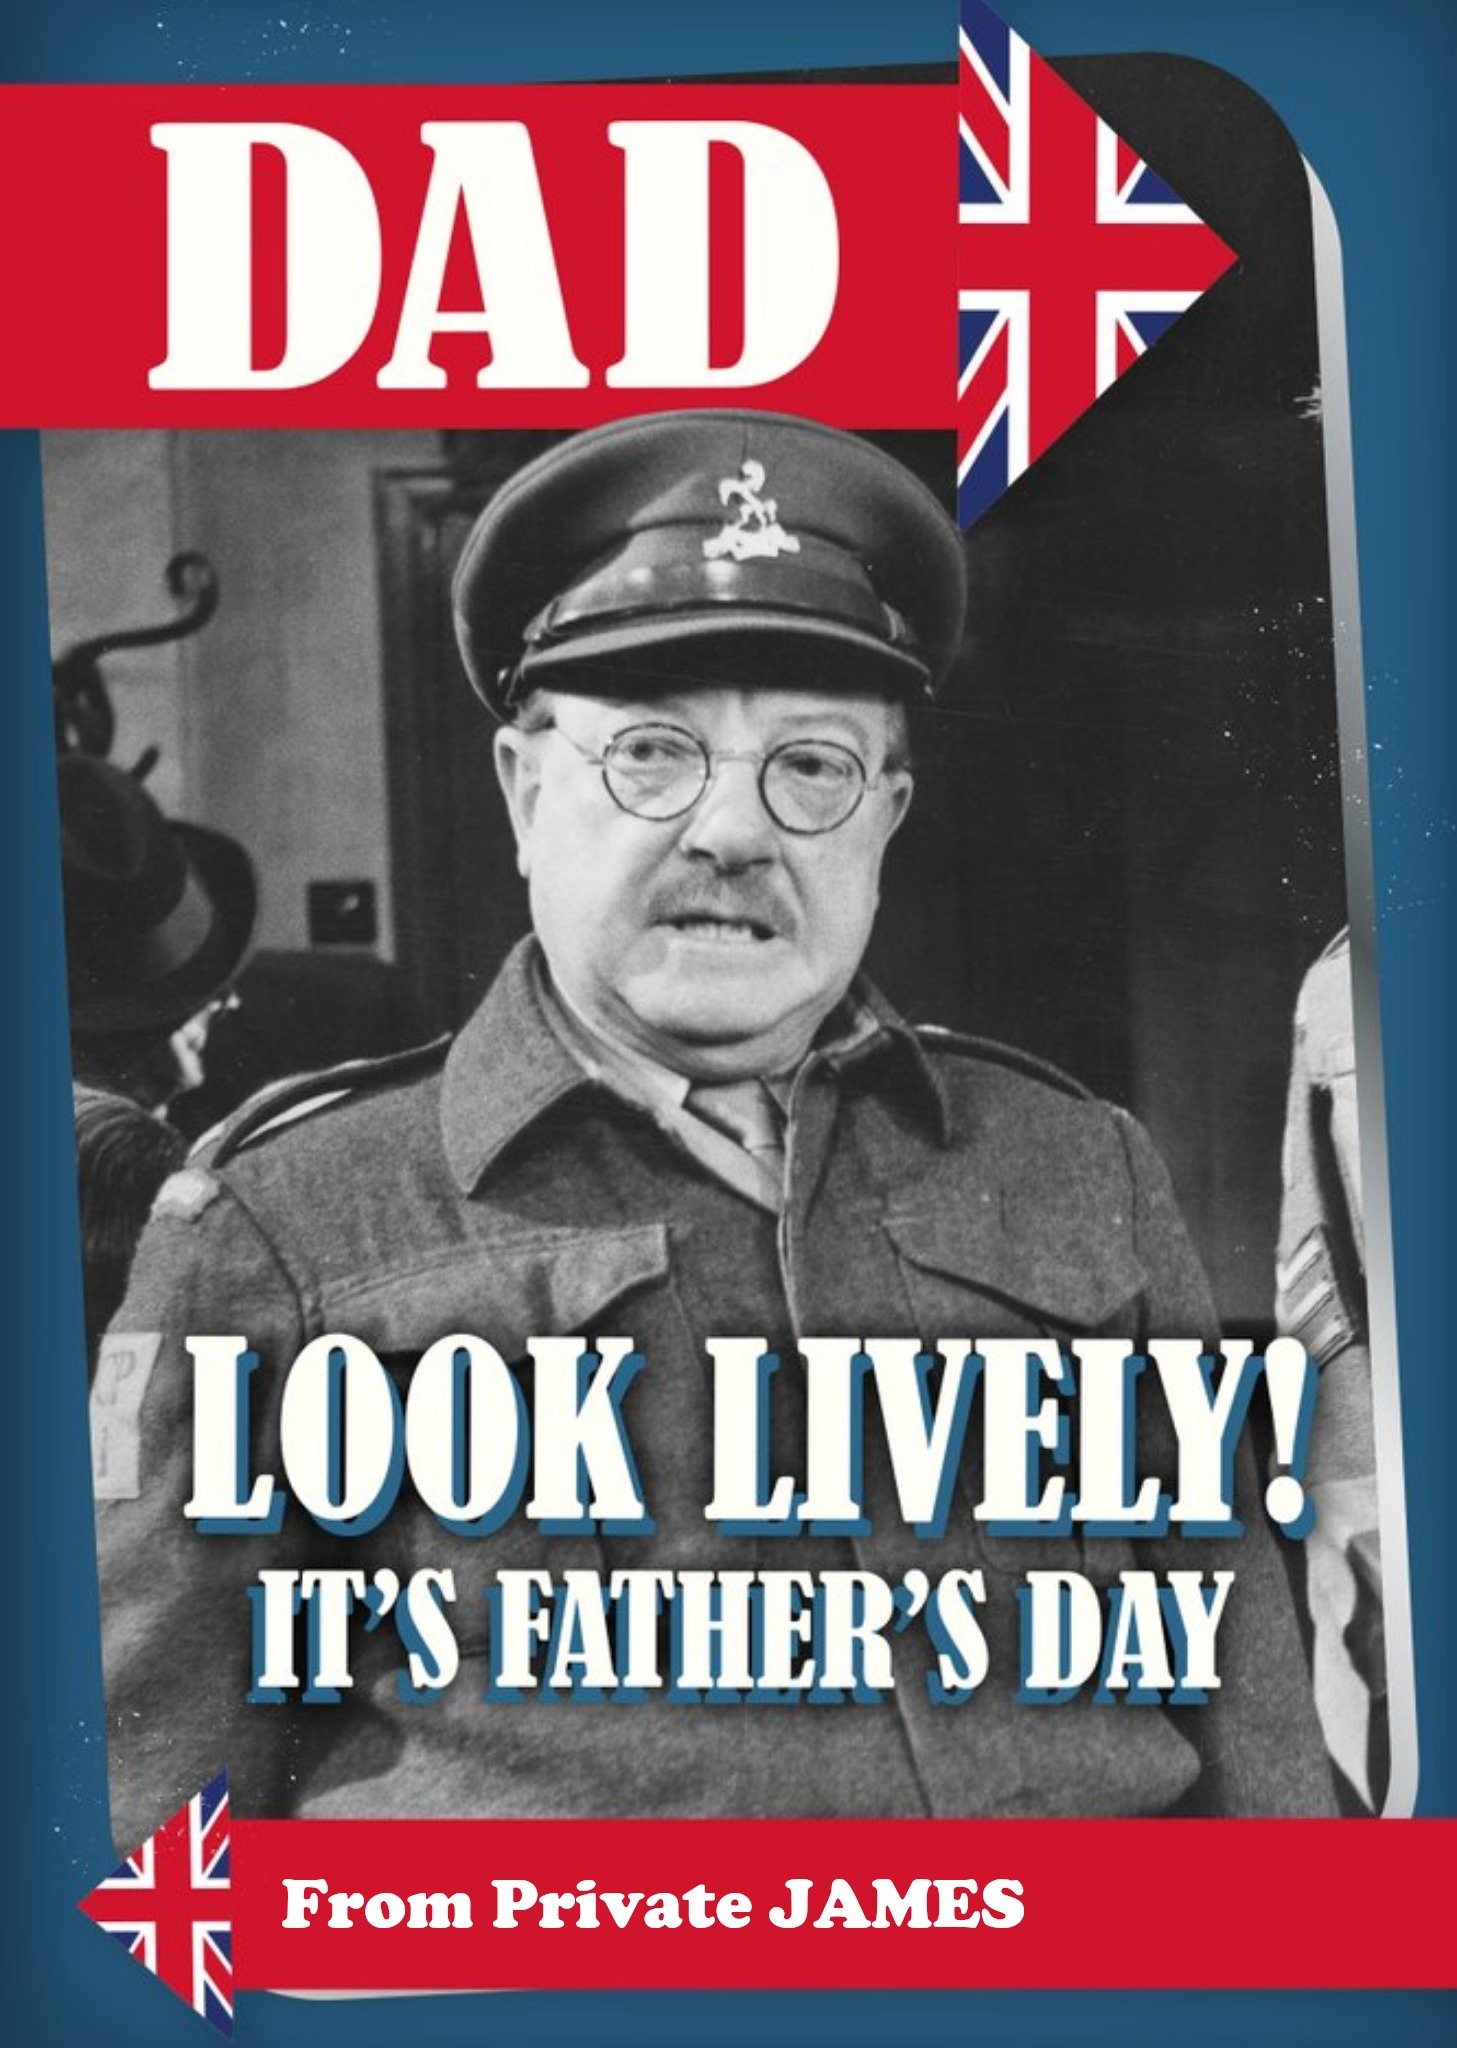 Retro Humour Dad's Army Look Lively It's Father's Day Card Ecard